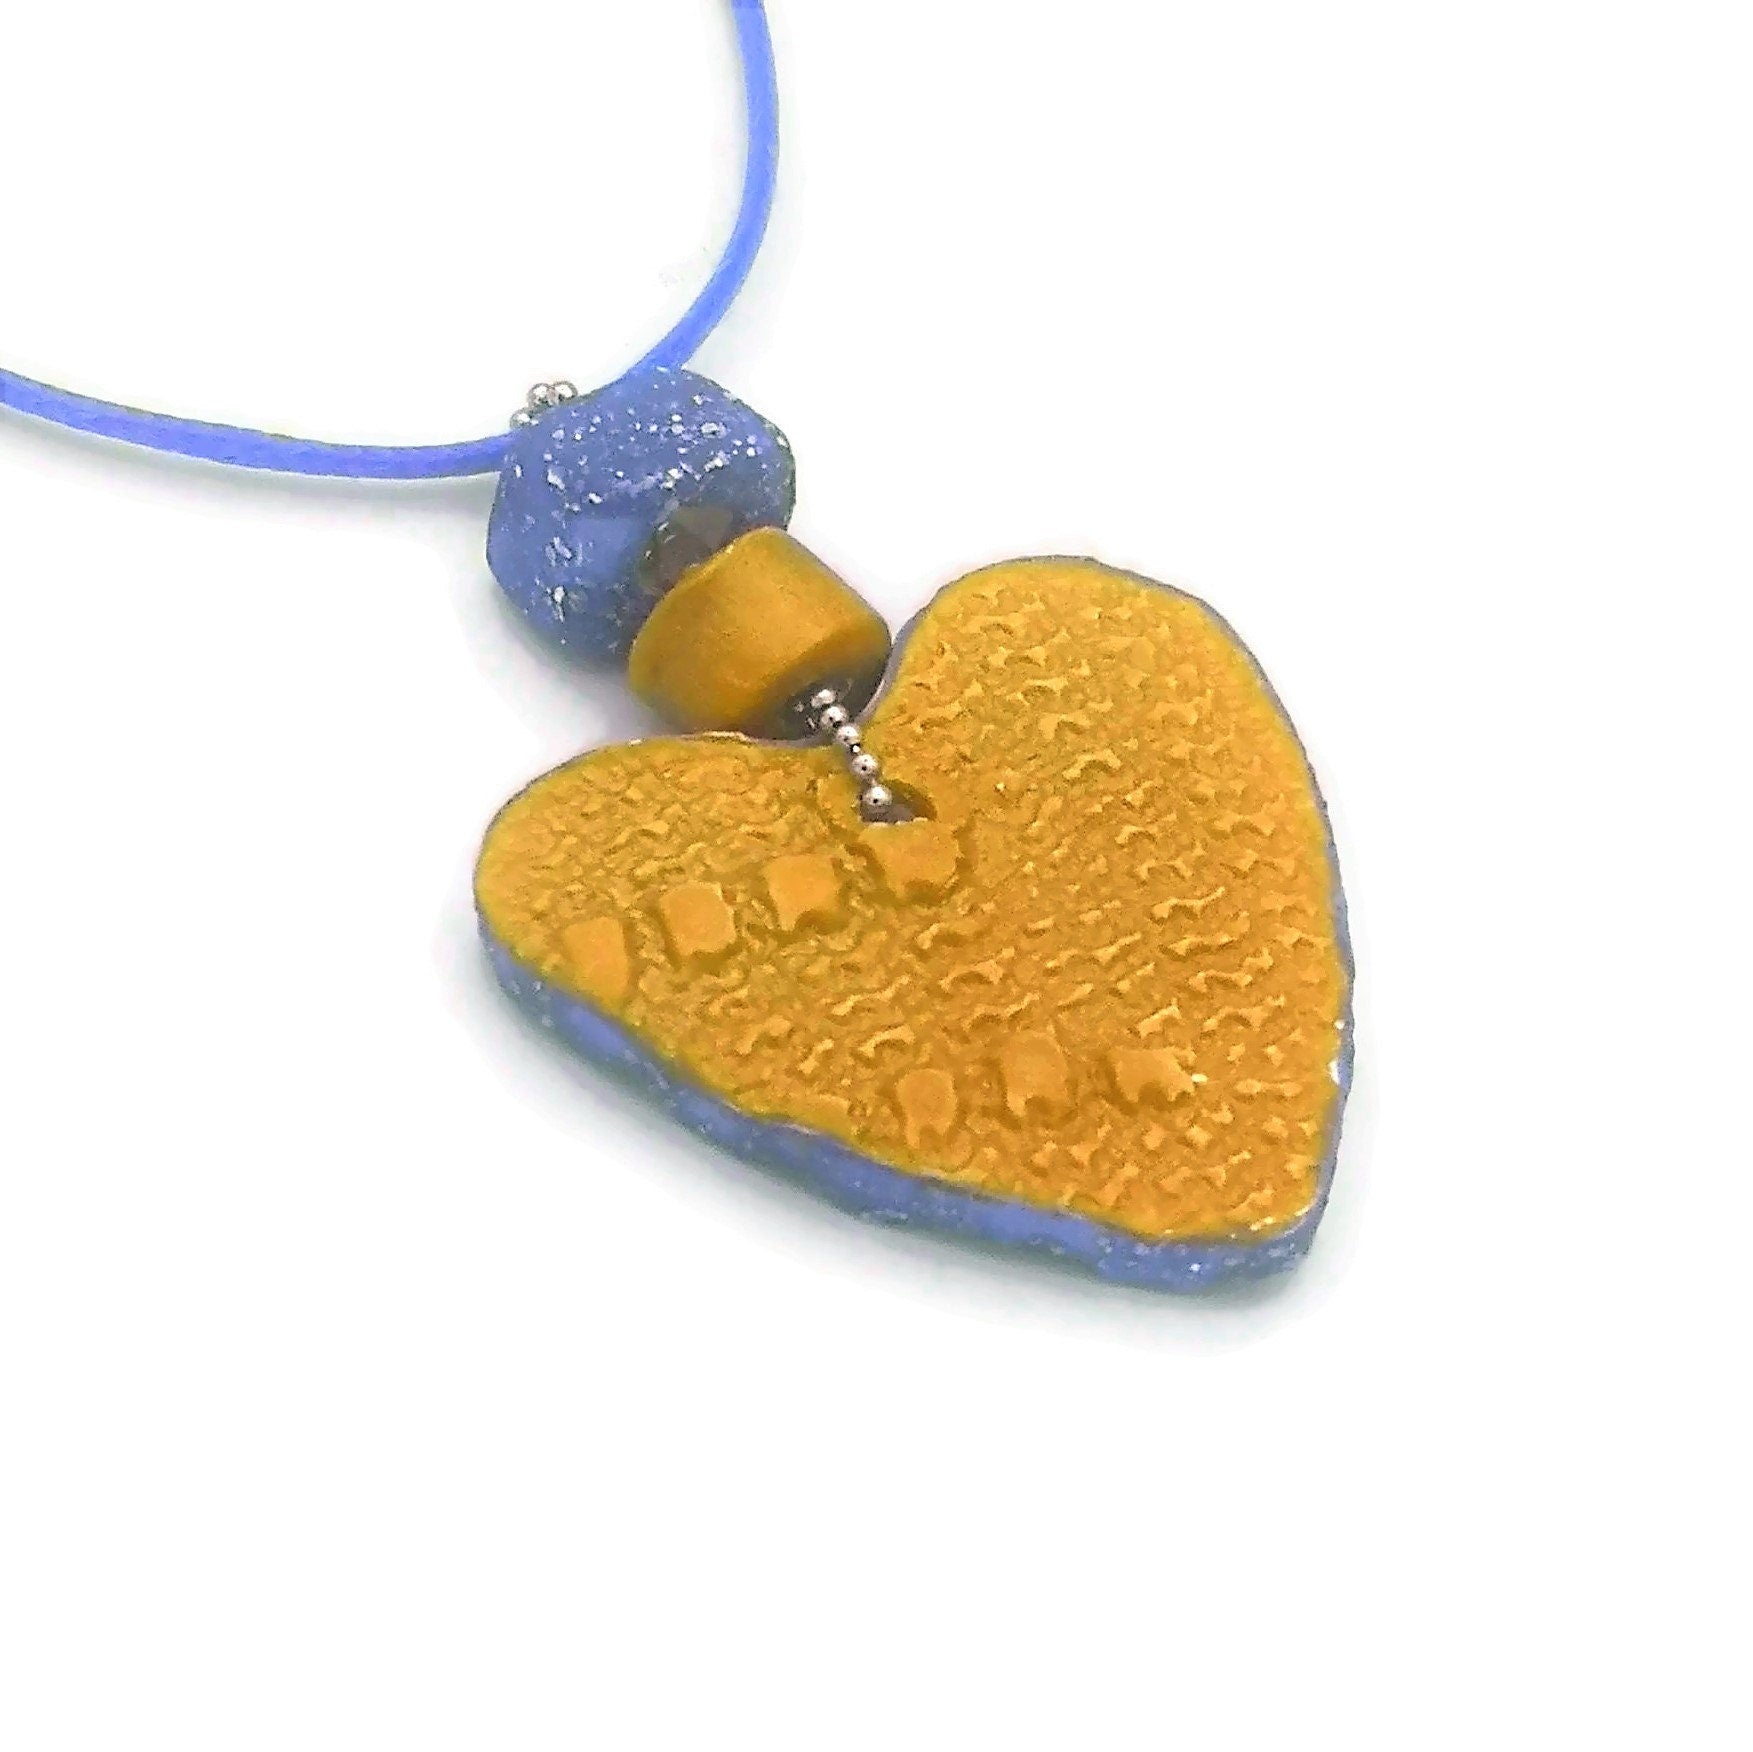 Statement Gold Heart Pendant Necklace For Women, Boho Clay Necklace, Everyday Necklace For Her, Cute Mother Day Gift From Daughter - Ceramica Ana Rafael